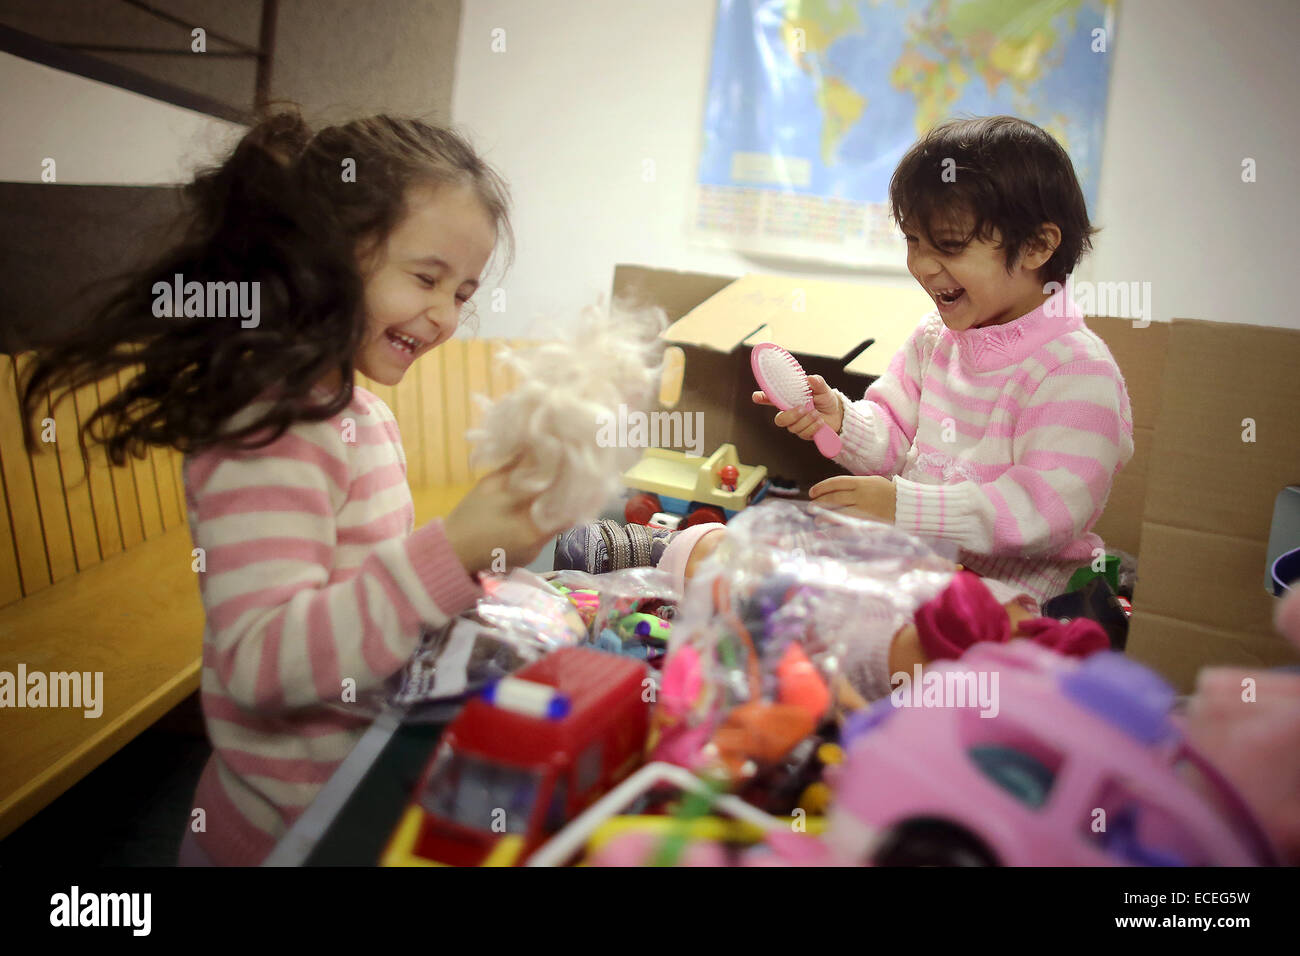 Mainz, Germany. 12th Dec, 2014. Hatice (L) and Oueza (R, children of Russian refugees) play with donated toys with their mother Jurida in the Alte Feuerwache in Mainz, Germany, 12 December 2014. Employees of the Rhineland-Palatinate State Office for Criminal Investigations donated to the refugees. Photo: FREDRIK VON ERICHSEN/dpa/Alamy Live News Stock Photo